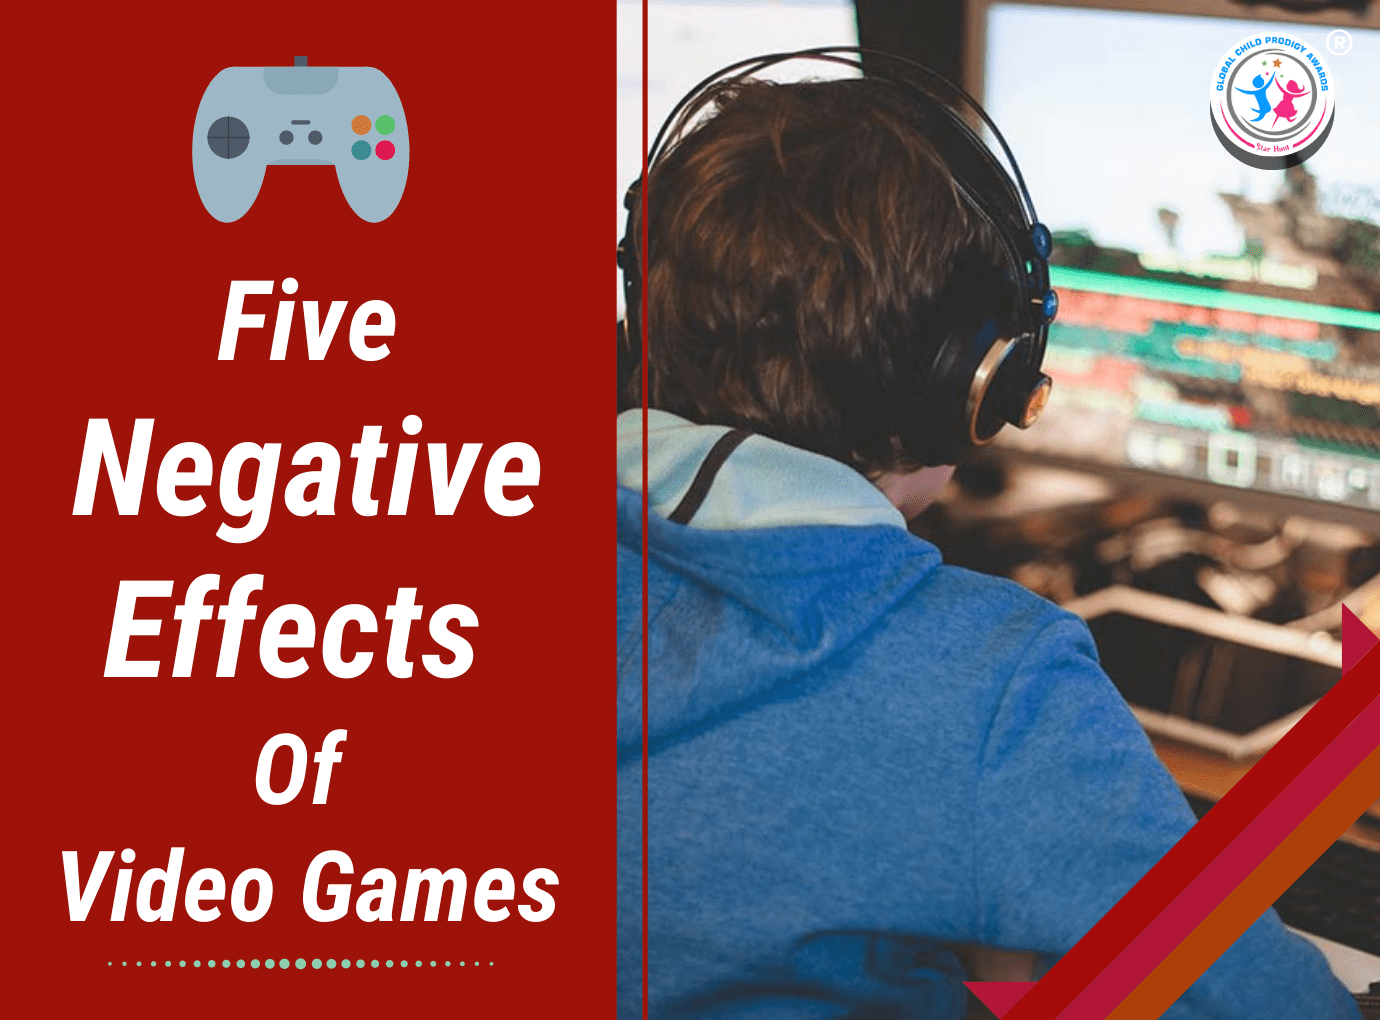 in what ways do video games affect children and teenagers